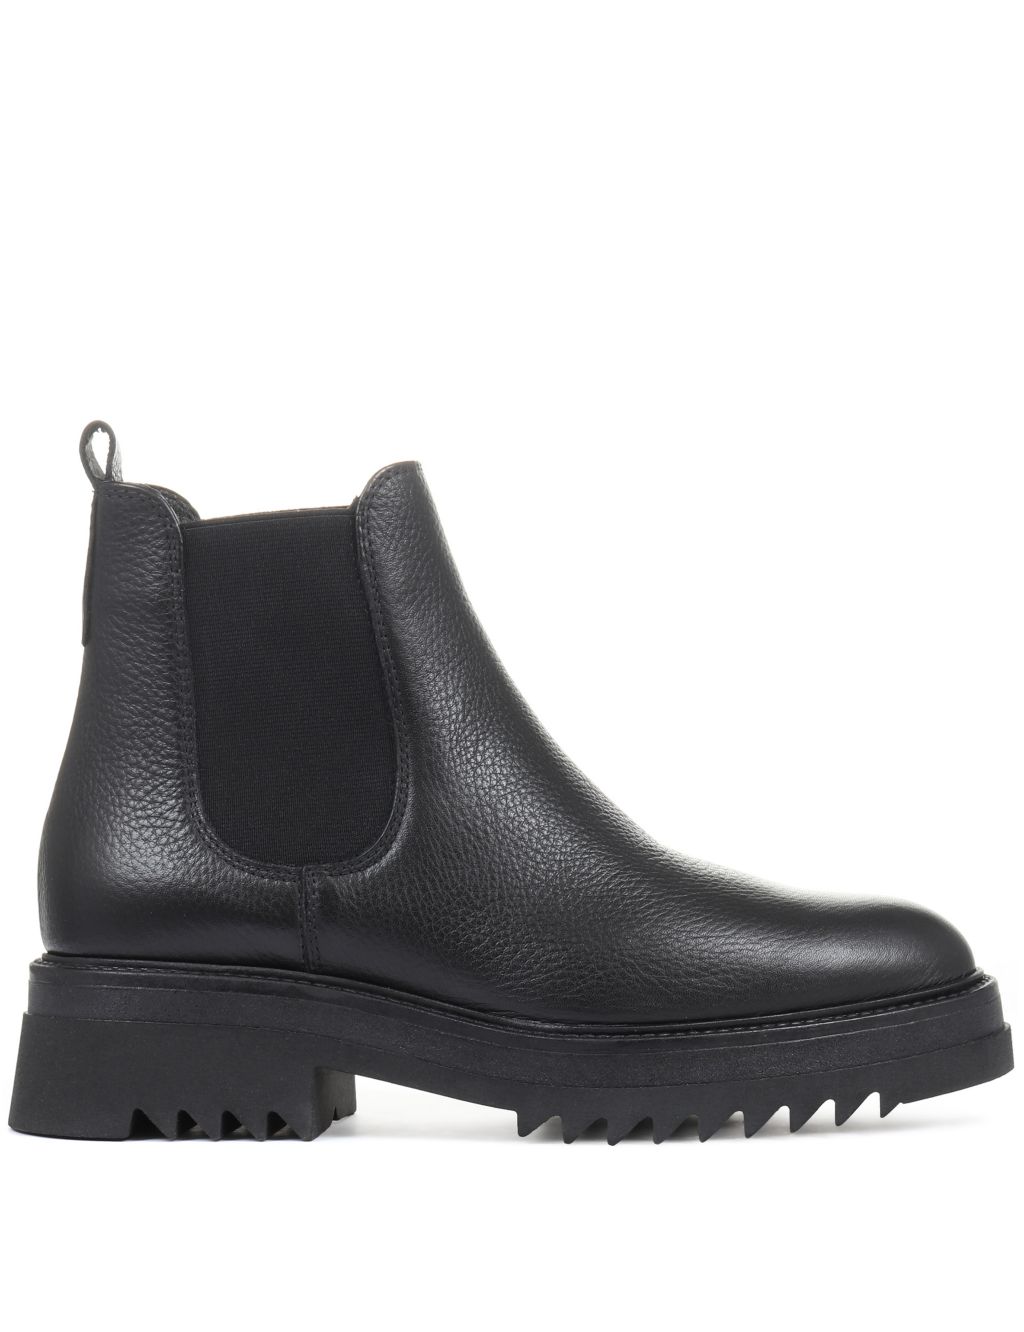 Leather Chelsea Flatform Ankle Boots image 5